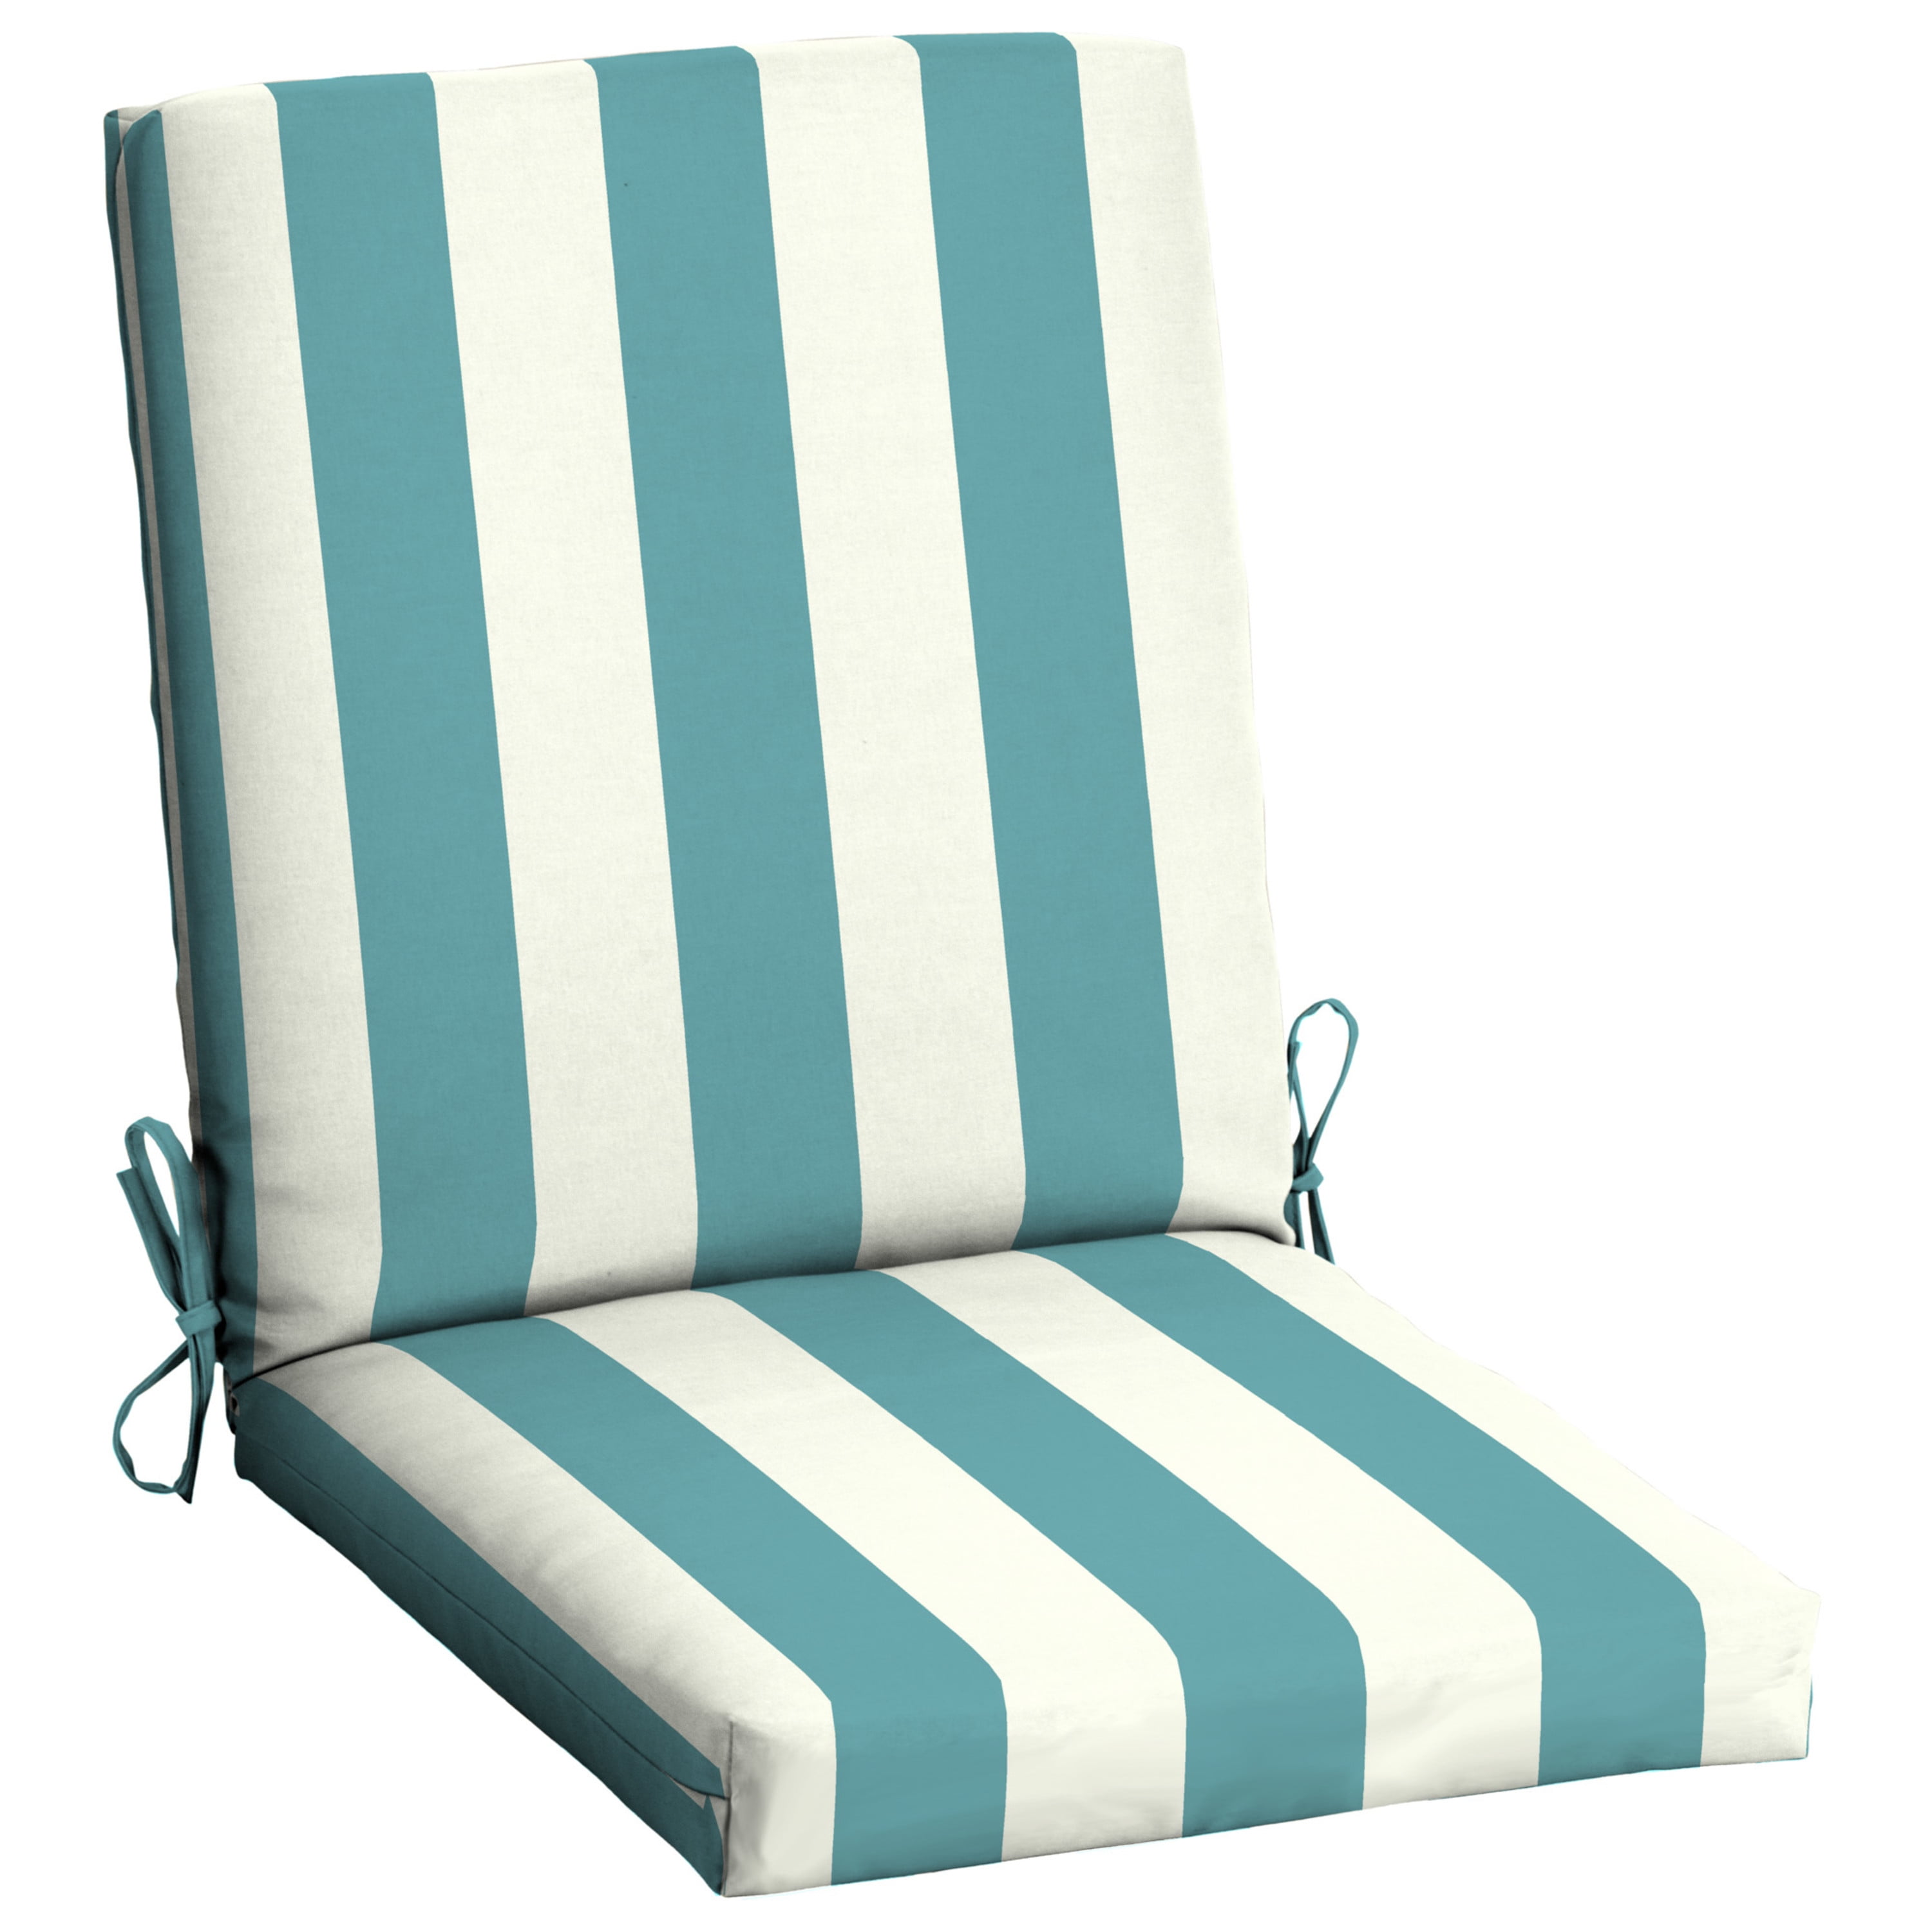 Stunning Chair Seat Pads With Ties Kitchen Dining Garden Patio Chair Cushions 